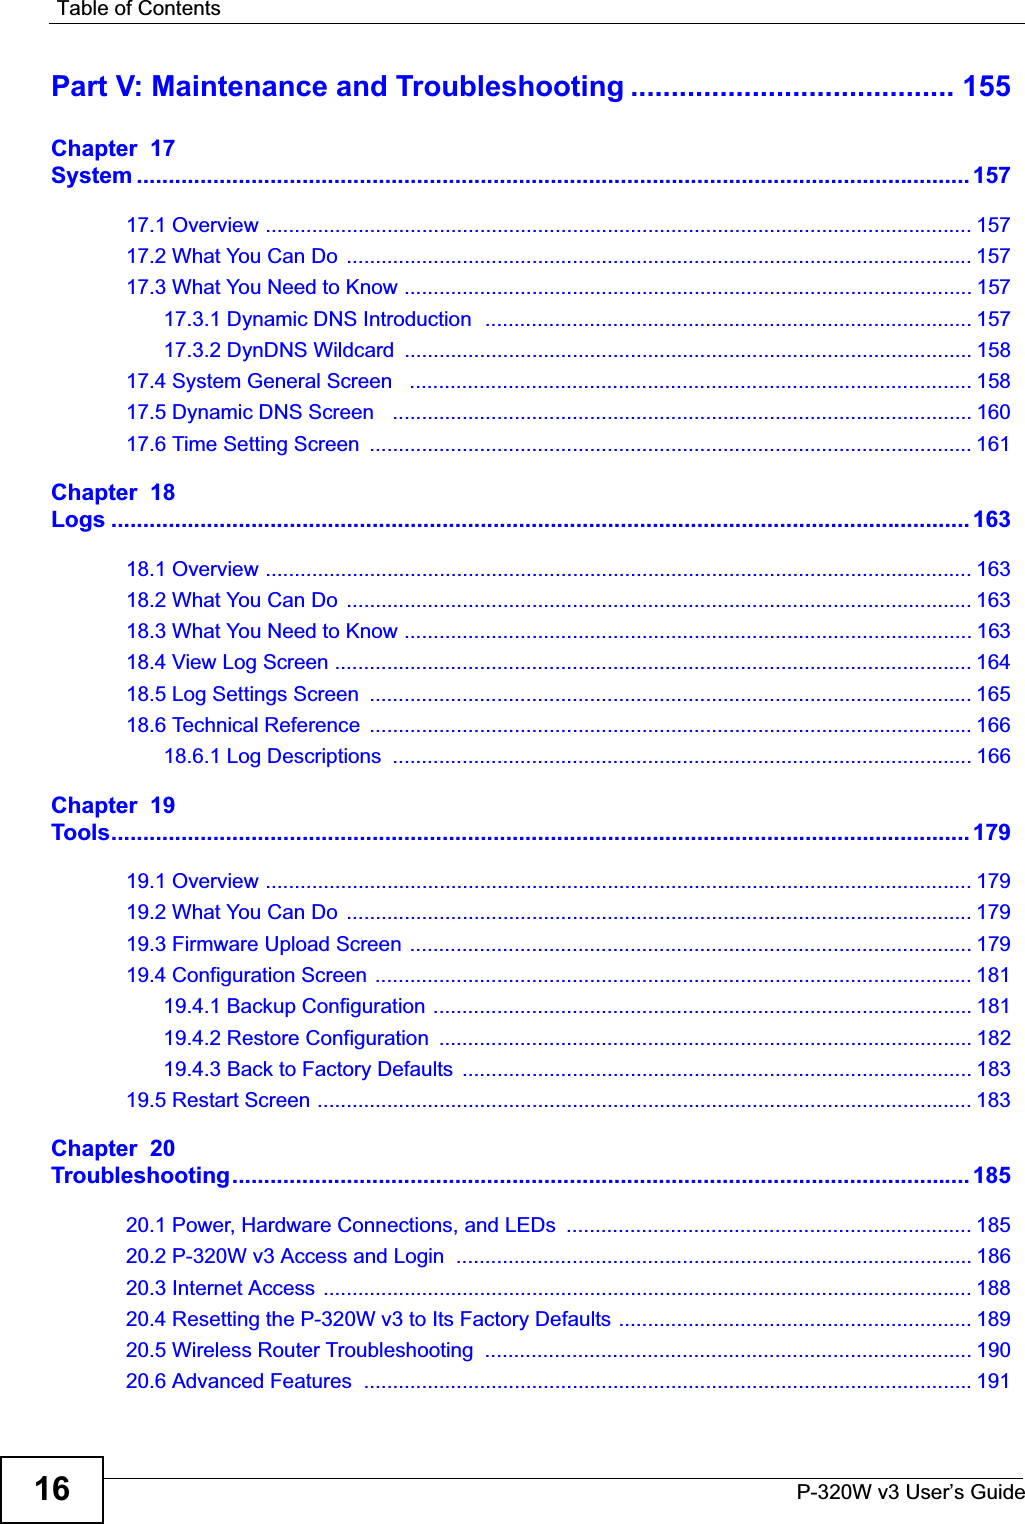 Table of ContentsP-320W v3 User’s Guide16Part V: Maintenance and Troubleshooting ........................................ 155Chapter  17System ................................................................................................................................... 15717.1 Overview .......................................................................................................................... 15717.2 What You Can Do  ............................................................................................................ 15717.3 What You Need to Know .................................................................................................. 15717.3.1 Dynamic DNS Introduction  .................................................................................... 15717.3.2 DynDNS Wildcard  .................................................................................................. 15817.4 System General Screen   ................................................................................................. 15817.5 Dynamic DNS Screen   .................................................................................................... 16017.6 Time Setting Screen  ........................................................................................................ 161Chapter  18Logs ....................................................................................................................................... 16318.1 Overview .......................................................................................................................... 16318.2 What You Can Do  ............................................................................................................ 16318.3 What You Need to Know .................................................................................................. 16318.4 View Log Screen .............................................................................................................. 16418.5 Log Settings Screen  ........................................................................................................ 16518.6 Technical Reference  ........................................................................................................ 16618.6.1 Log Descriptions  .................................................................................................... 166Chapter  19Tools....................................................................................................................................... 17919.1 Overview .......................................................................................................................... 17919.2 What You Can Do  ............................................................................................................ 17919.3 Firmware Upload Screen ................................................................................................. 17919.4 Configuration Screen ....................................................................................................... 18119.4.1 Backup Configuration ............................................................................................. 18119.4.2 Restore Configuration  ............................................................................................ 18219.4.3 Back to Factory Defaults  ........................................................................................ 18319.5 Restart Screen ................................................................................................................. 183Chapter  20Troubleshooting.................................................................................................................... 18520.1 Power, Hardware Connections, and LEDs  ...................................................................... 18520.2 P-320W v3 Access and Login  ......................................................................................... 18620.3 Internet Access ................................................................................................................ 18820.4 Resetting the P-320W v3 to Its Factory Defaults ............................................................. 18920.5 Wireless Router Troubleshooting  .................................................................................... 19020.6 Advanced Features  .........................................................................................................191